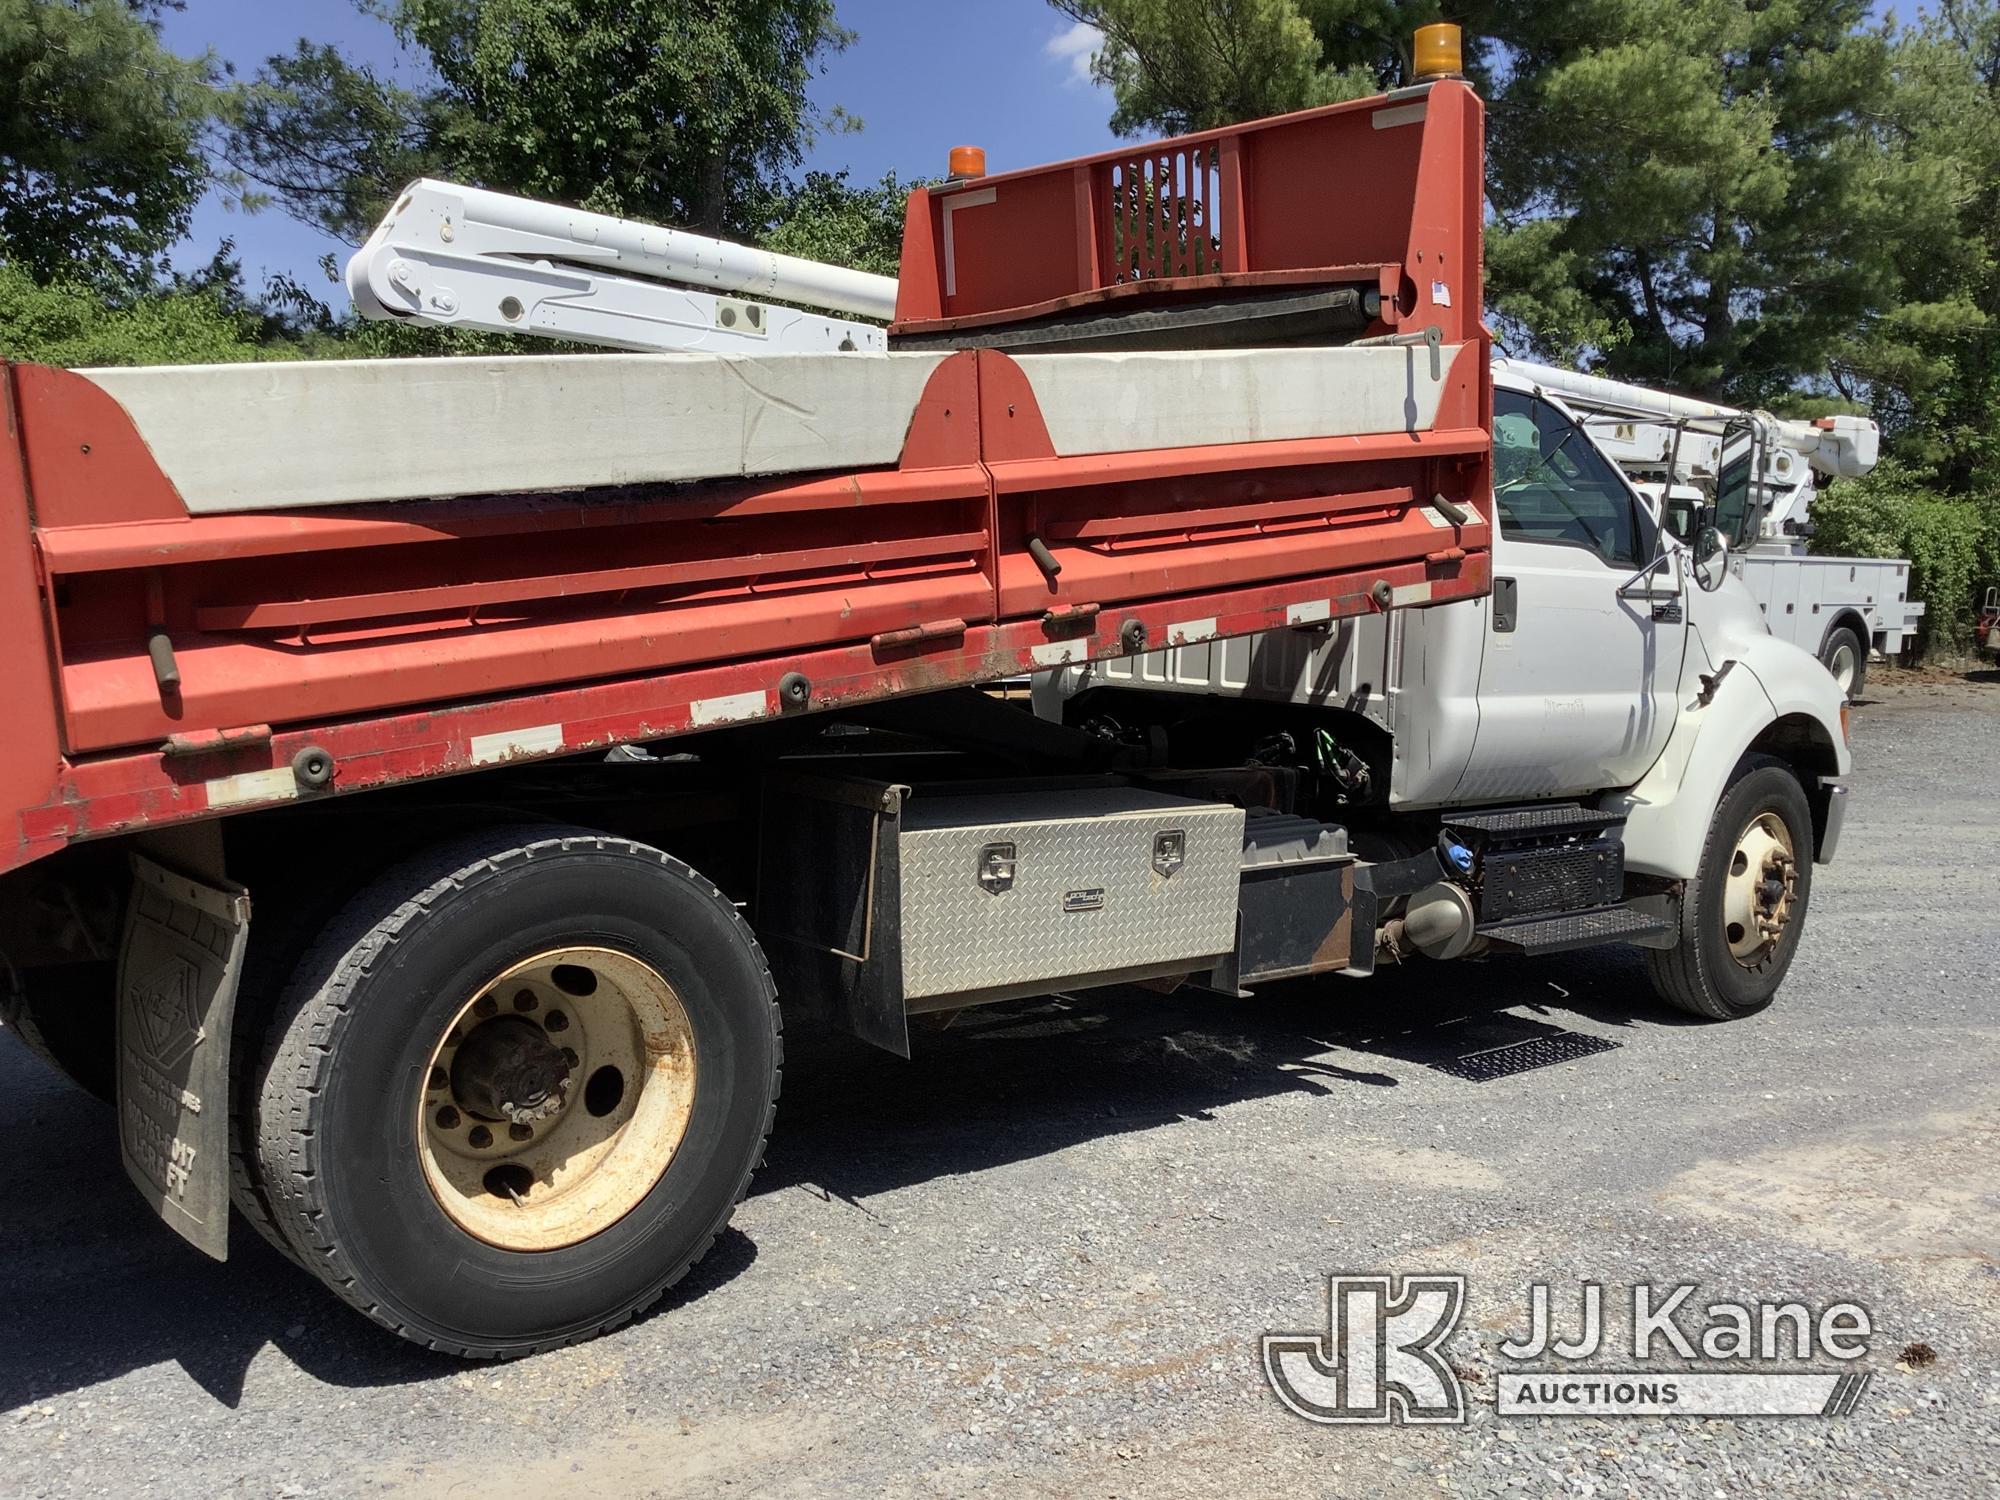 (Frederick, MD) 2012 Ford F750 Dump Truck Runs, Moves & Operates, Check Engine Light On, Reduced Pow